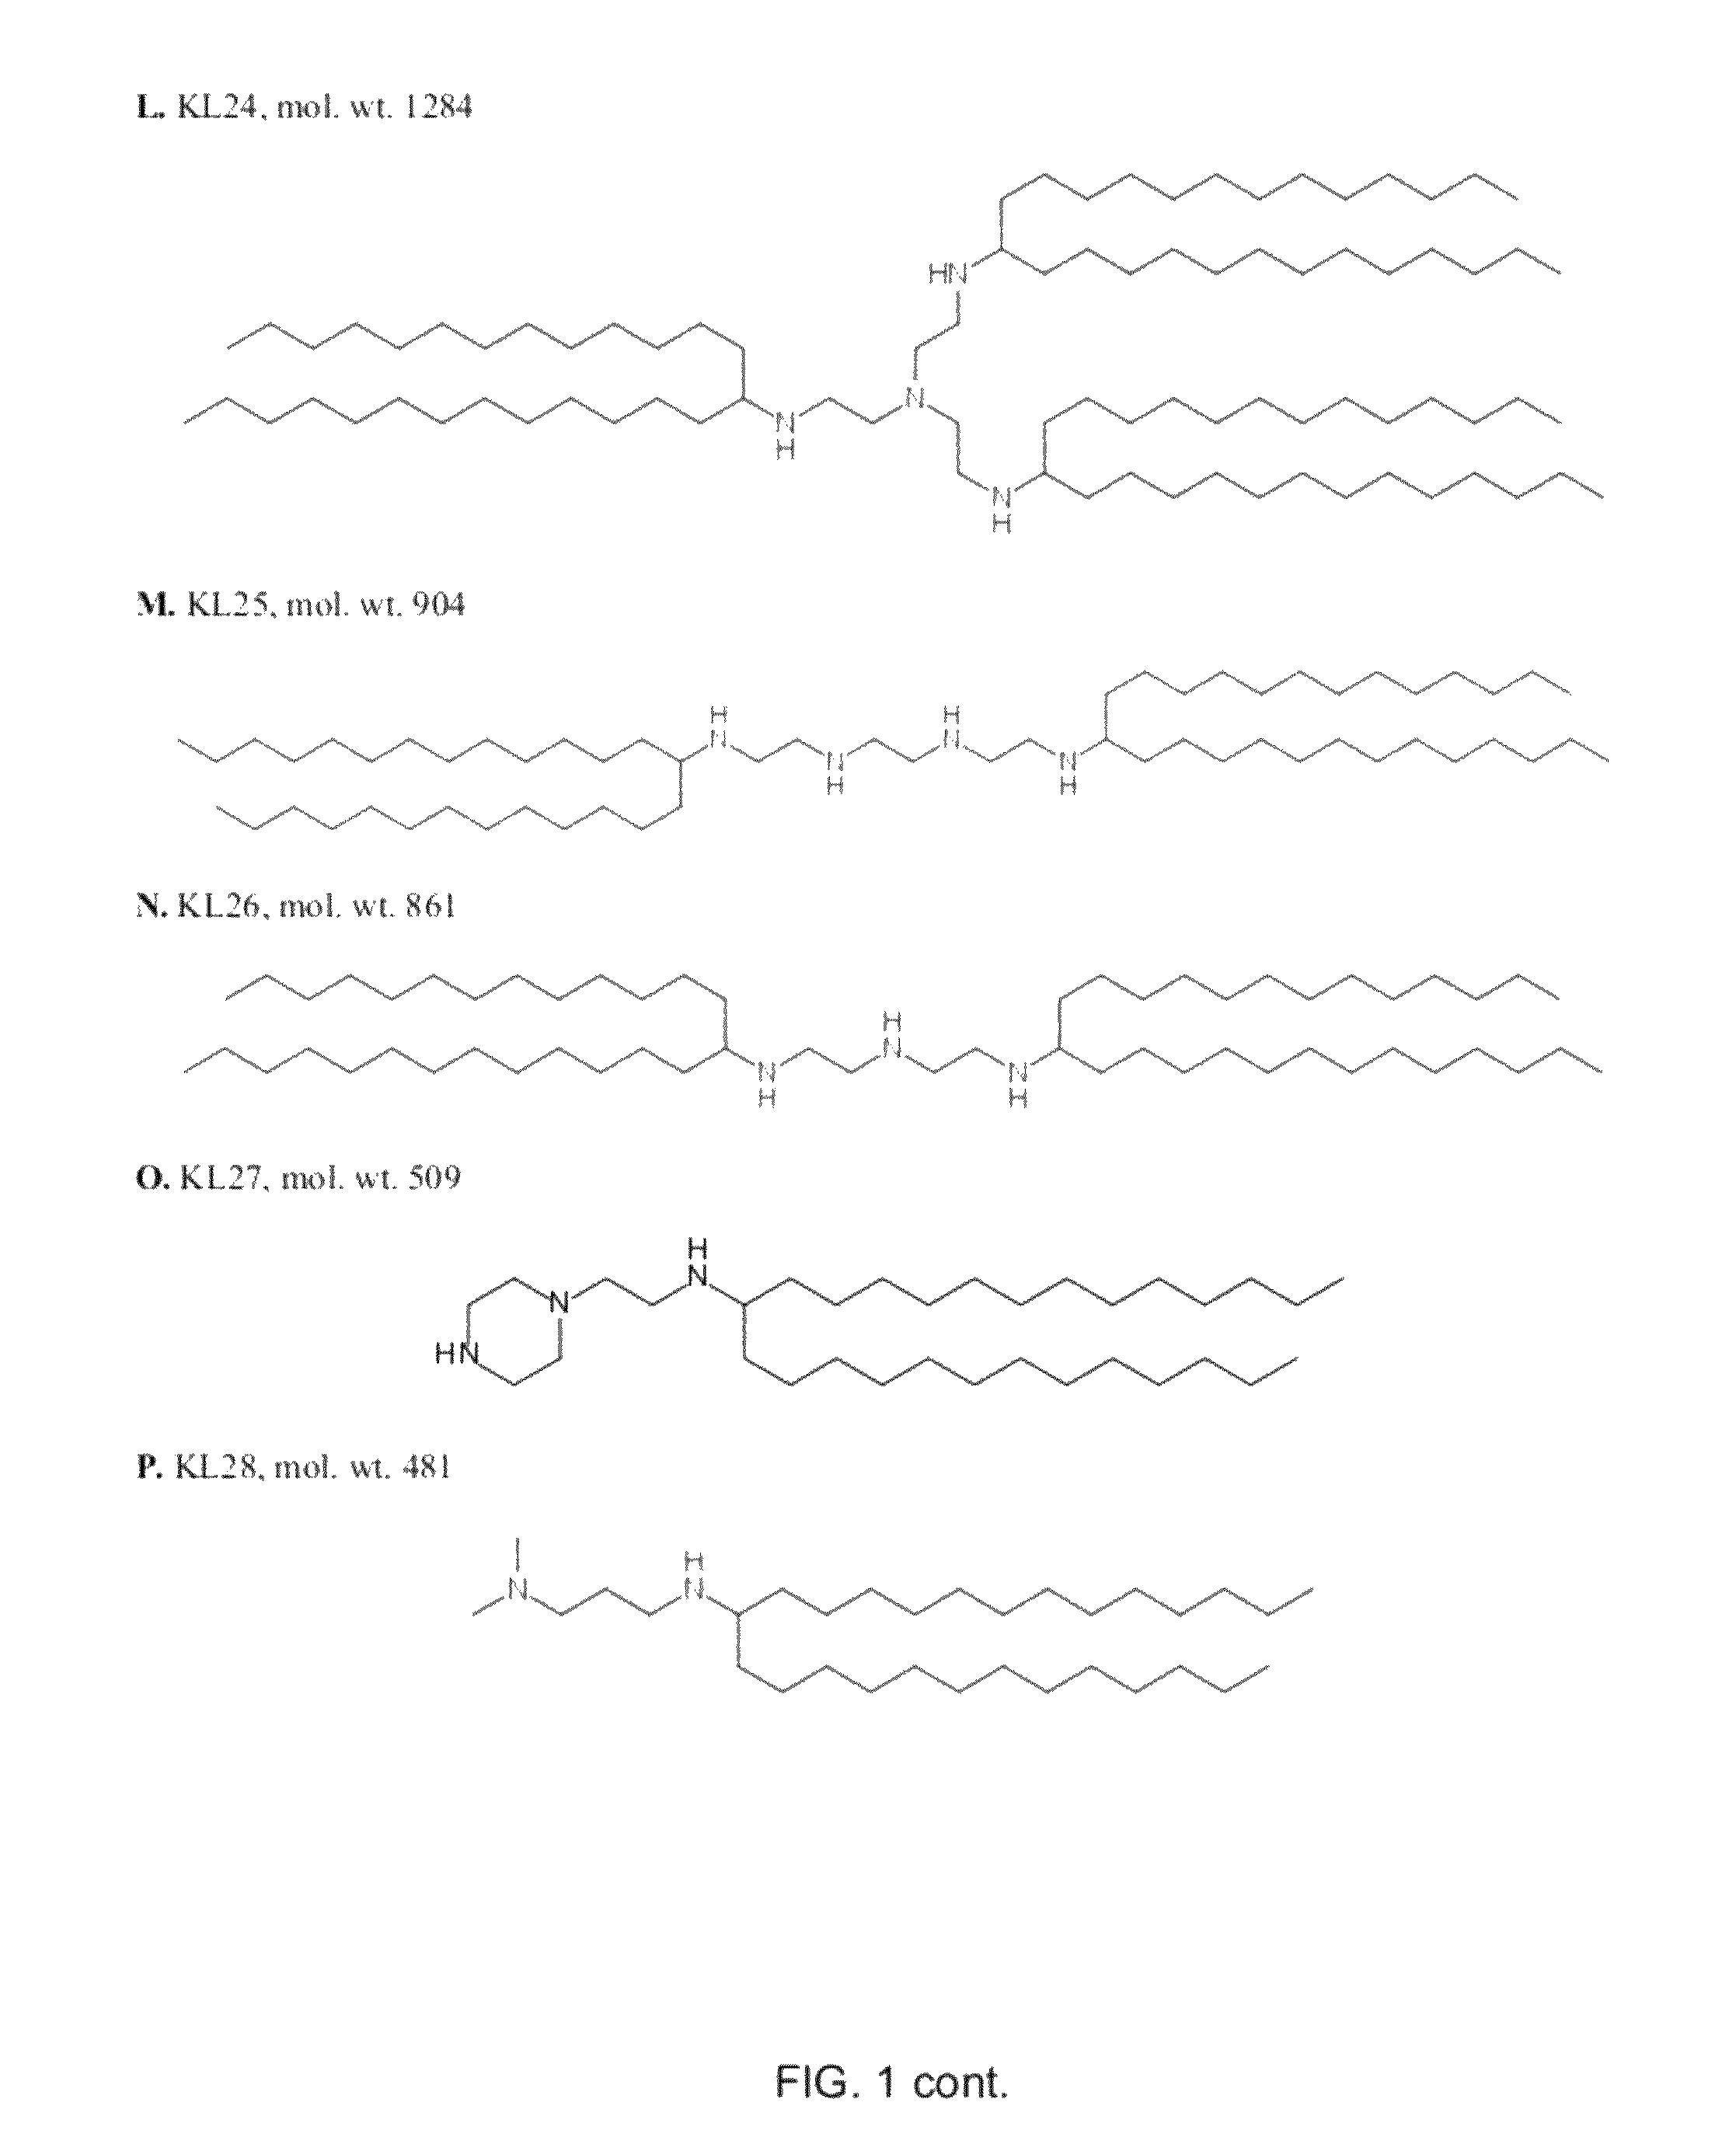 Lipids and compositions for intracellular delivery of biologically active compounds